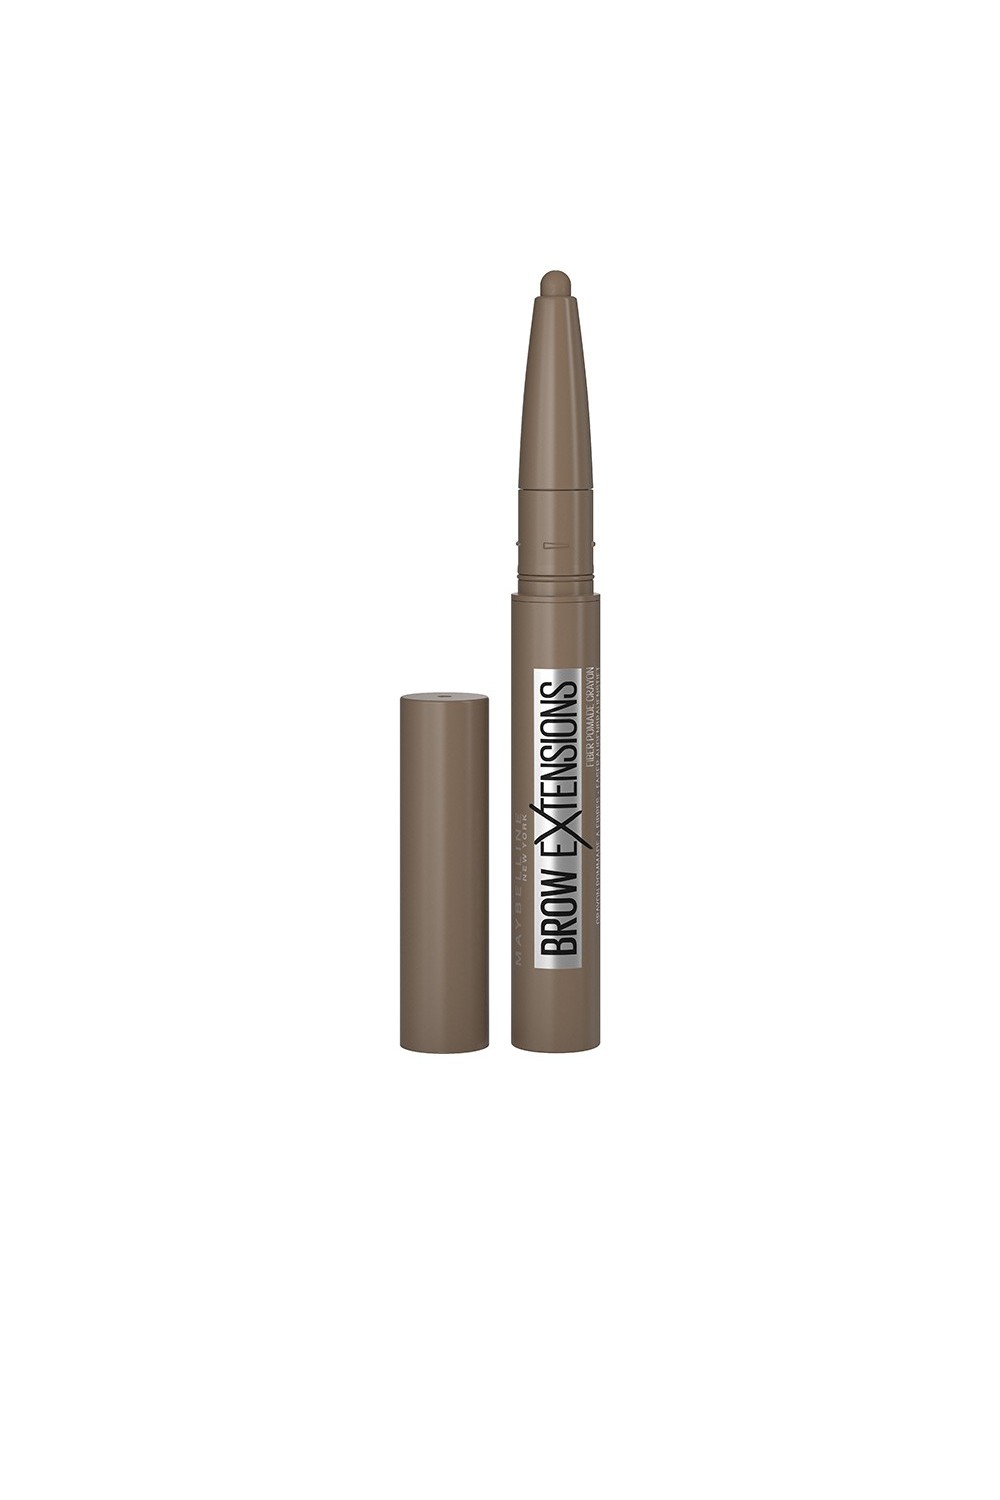 Maybelline Brow Extensions Stick 02 Soft Brown